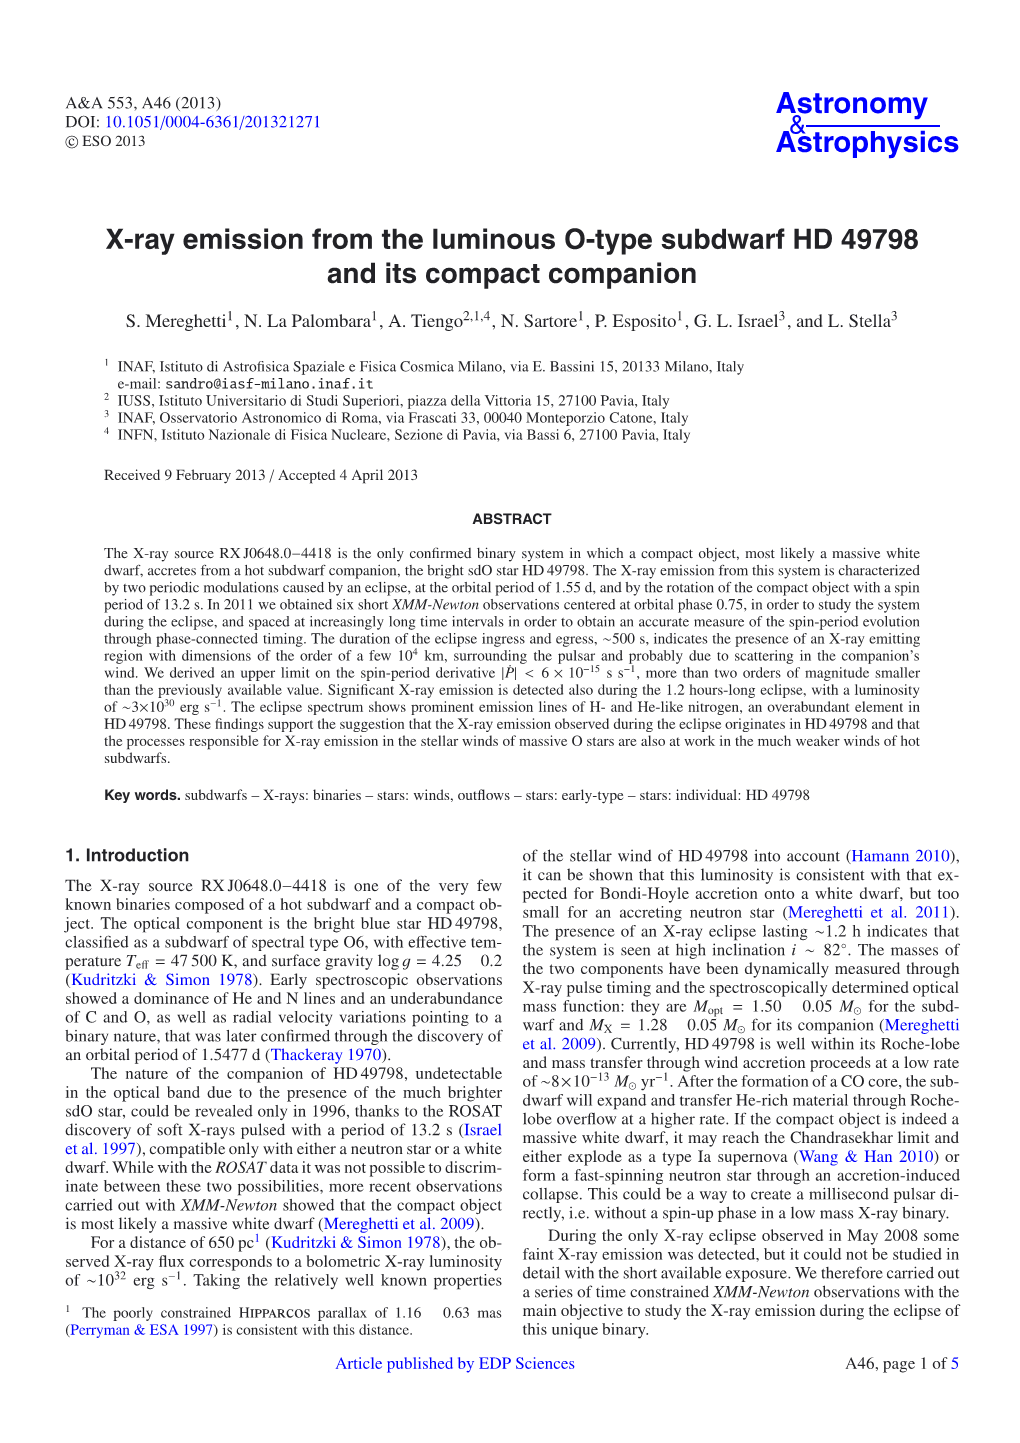 X-Ray Emission from the Luminous O-Type Subdwarf HD 49798 and Its Compact Companion